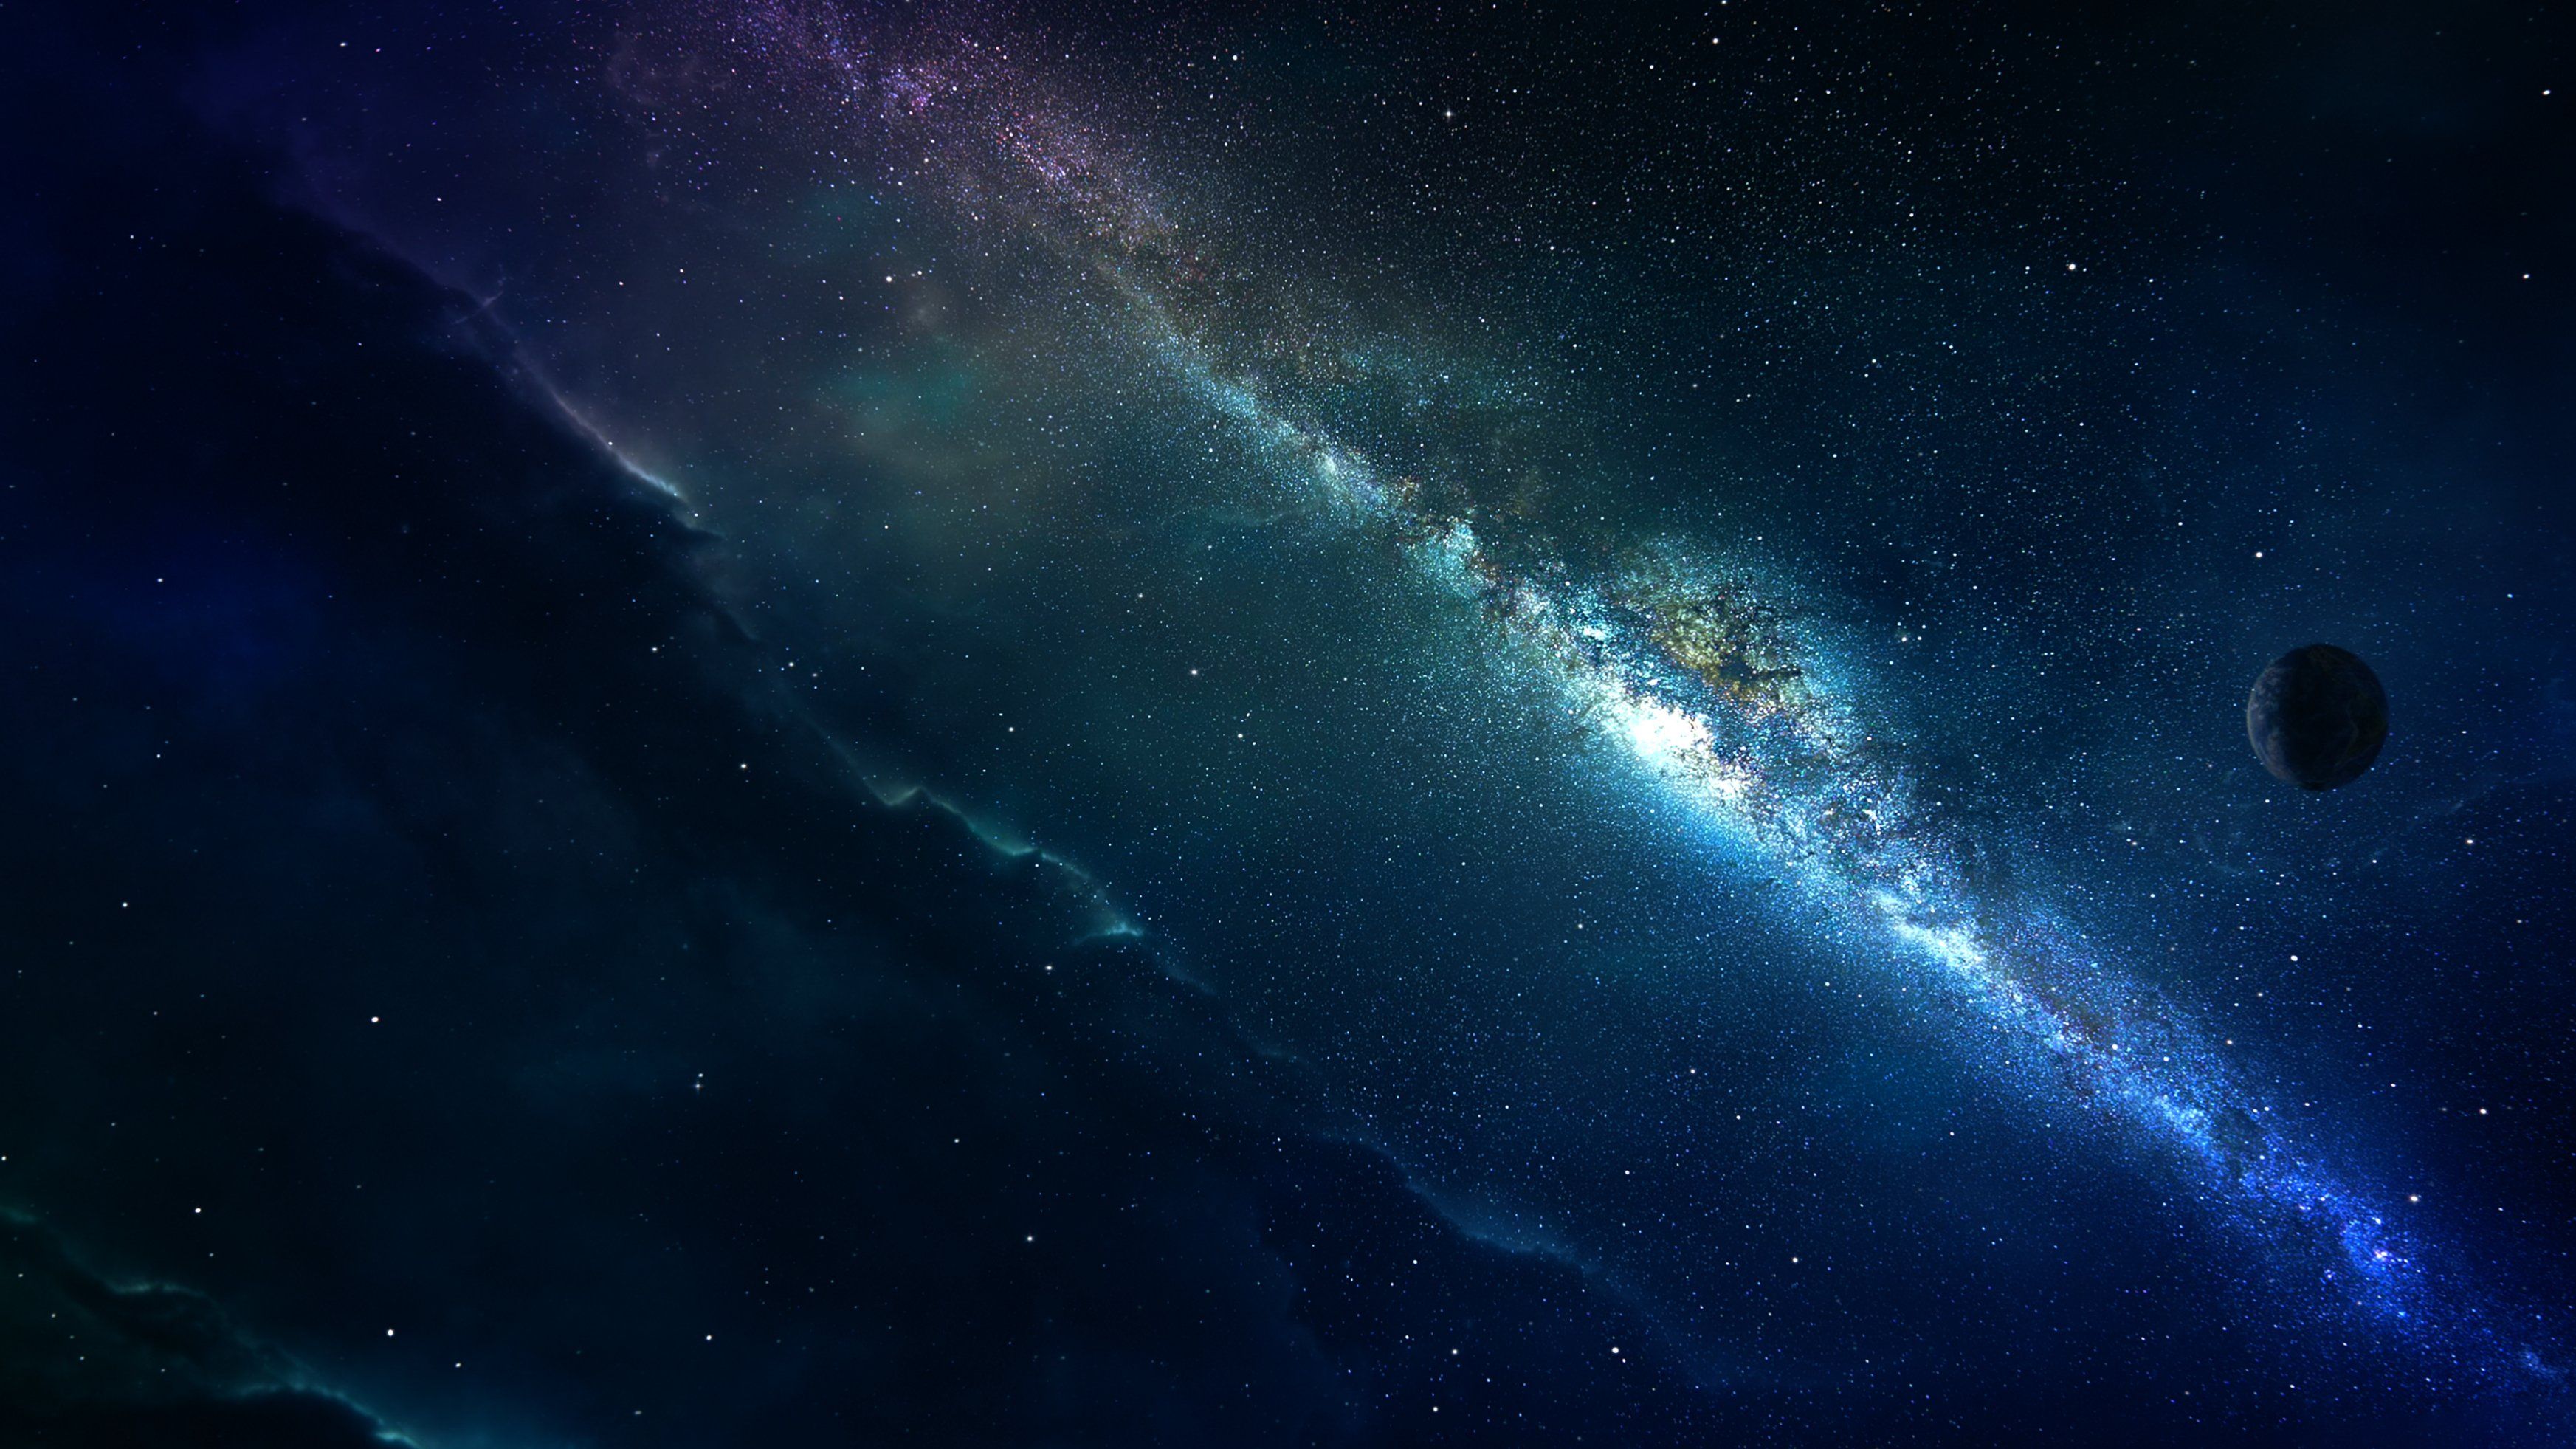 20 Choices 4k desktop wallpaper universe You Can Use It At No Cost 